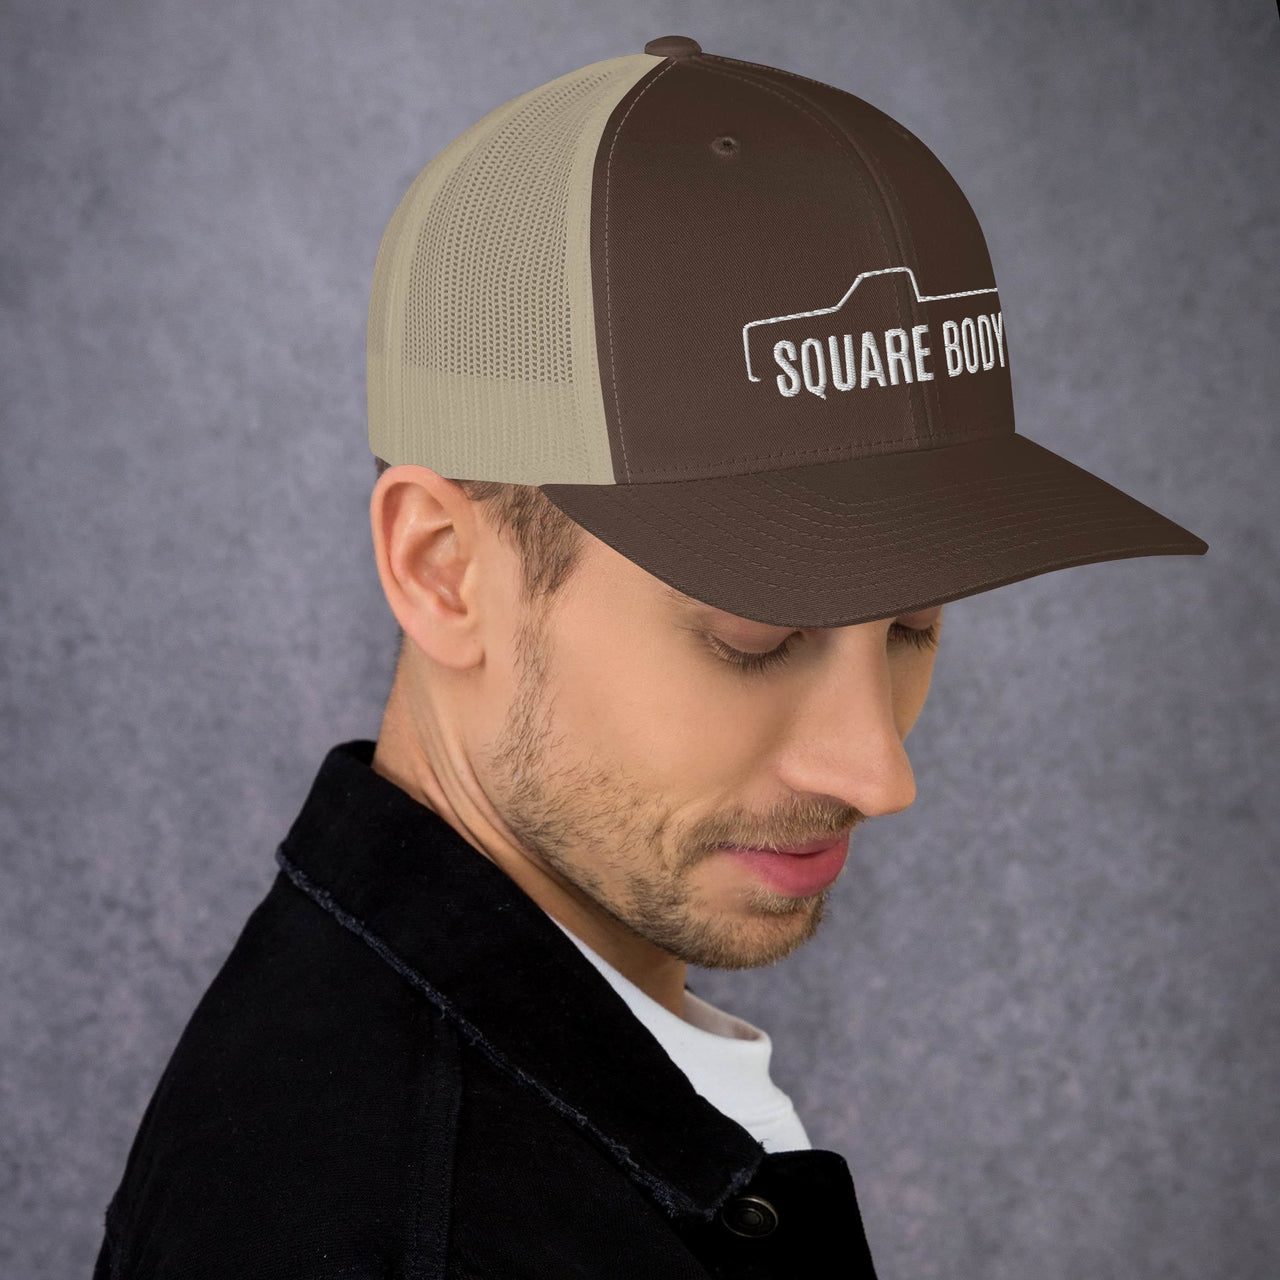 man wearing a Square body c10 k10 trucker hat from aggressive thread in brown